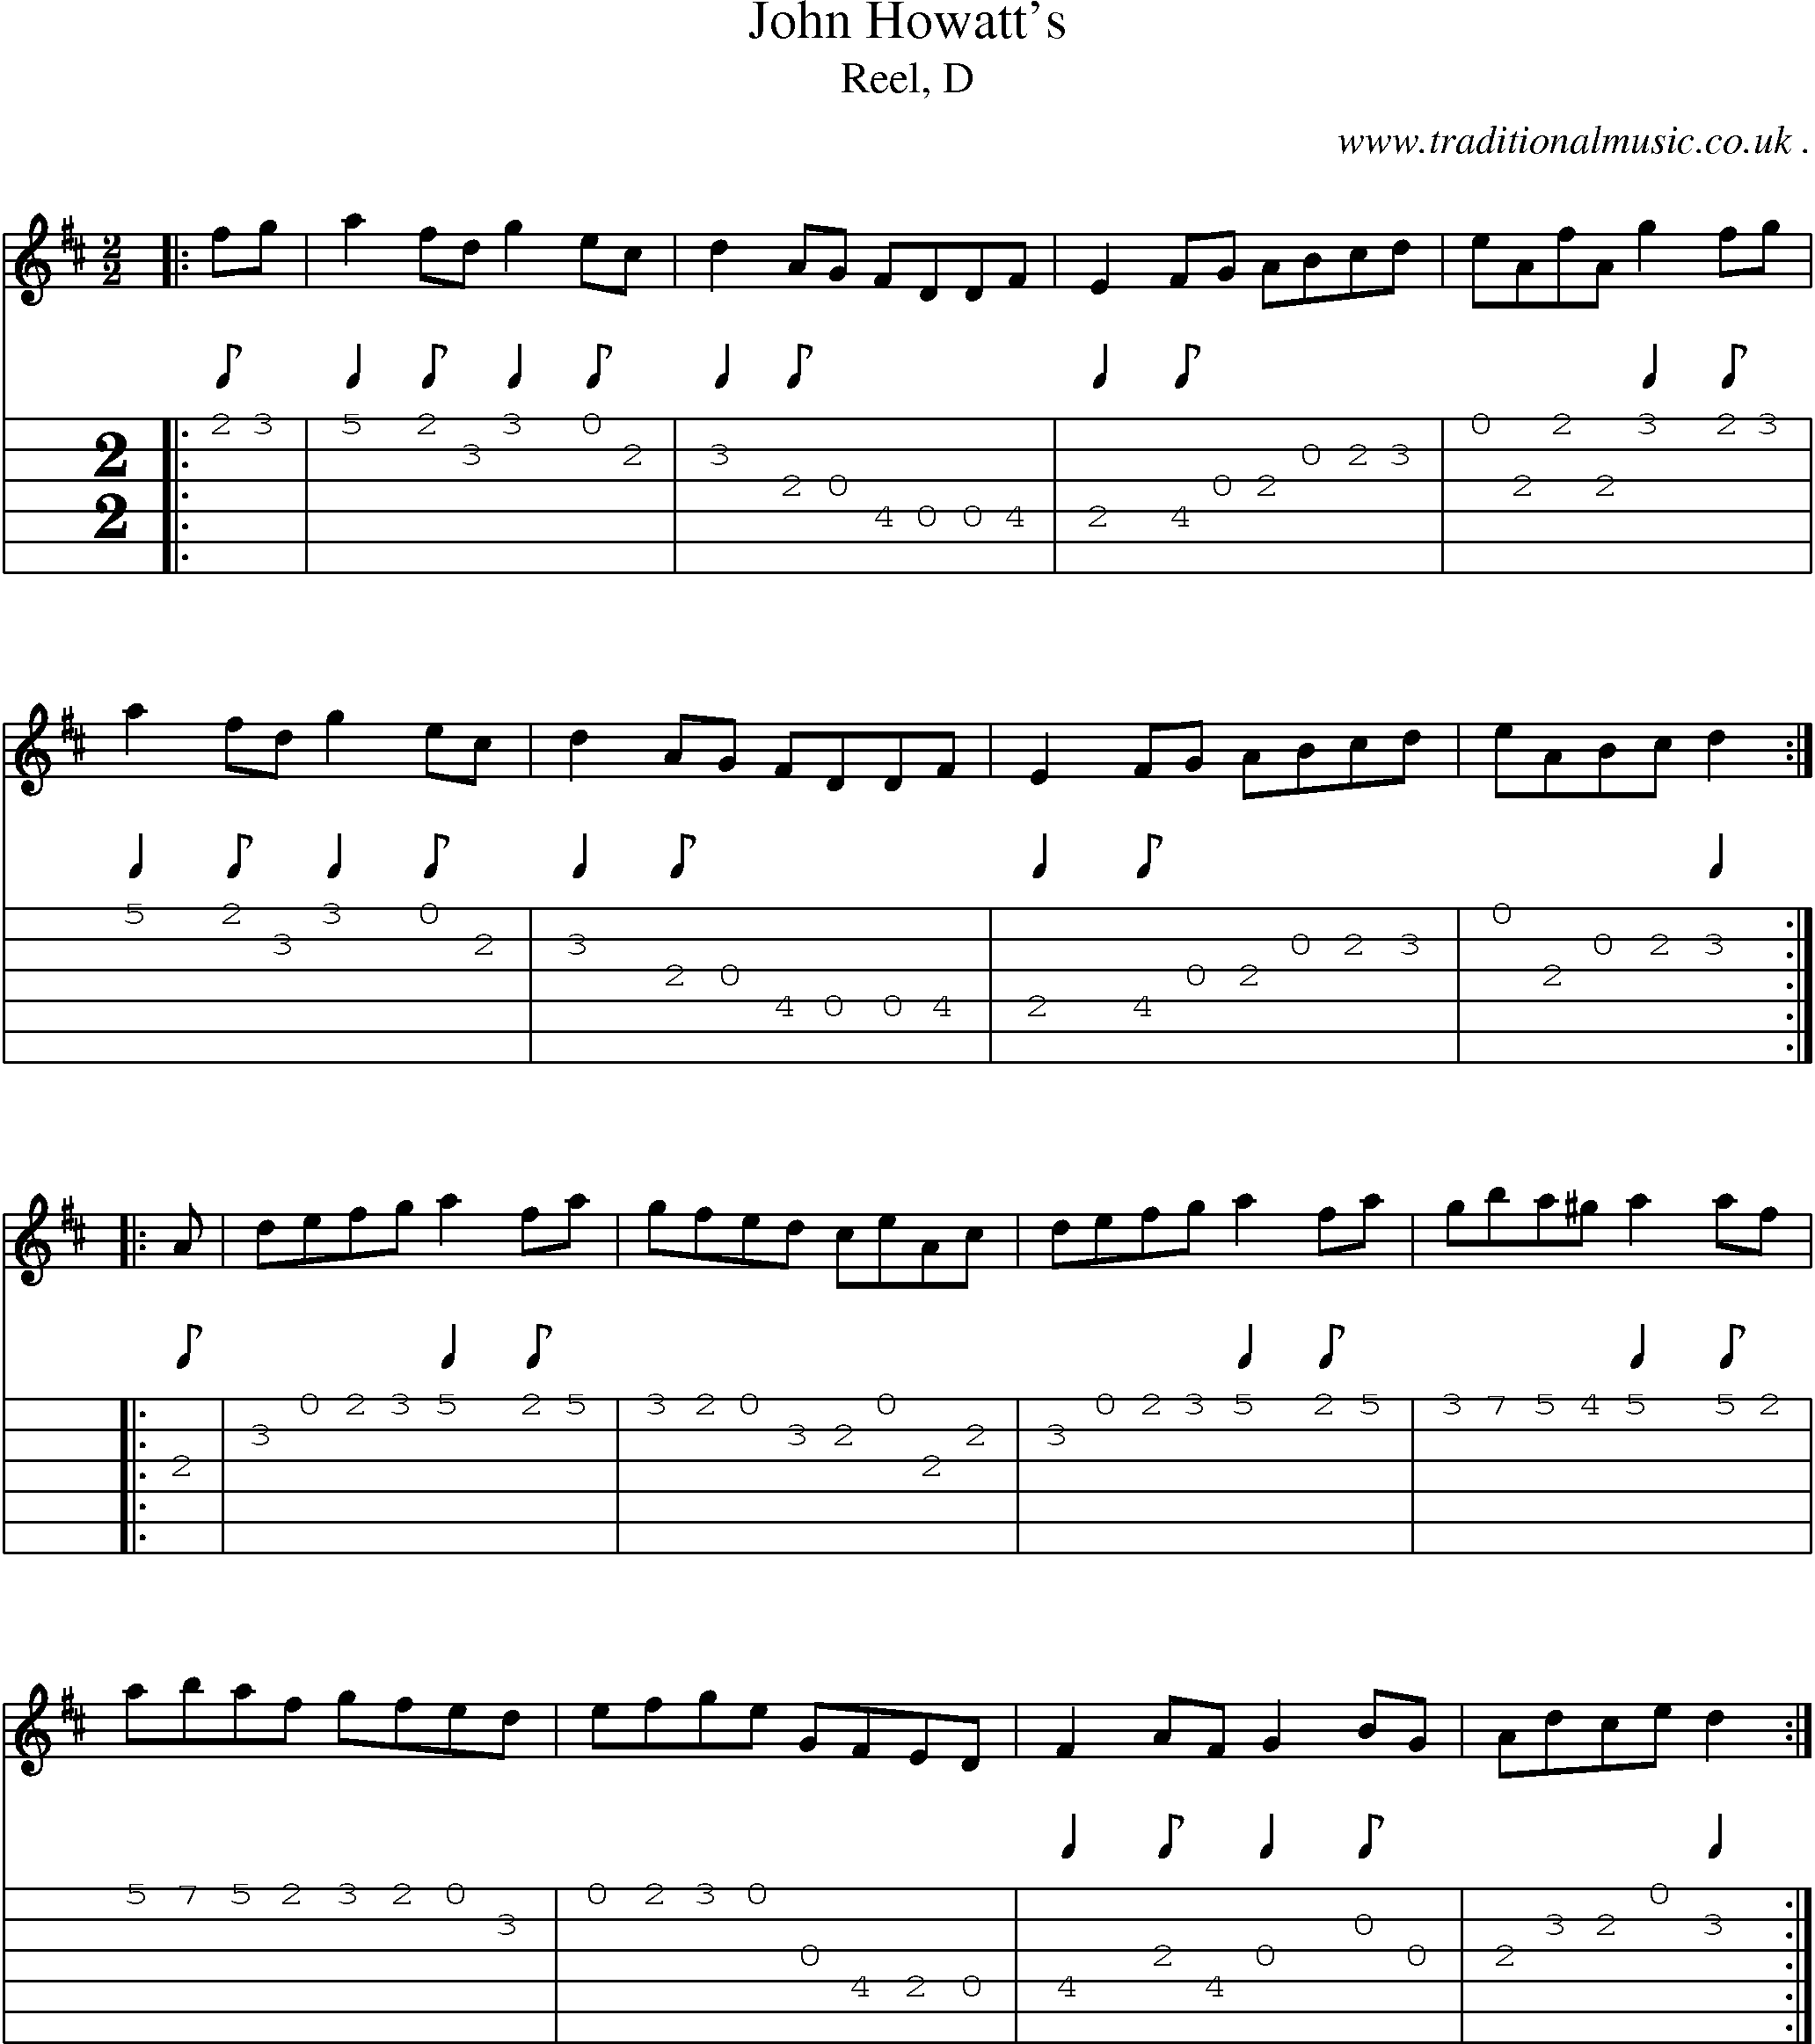 Sheet-music  score, Chords and Guitar Tabs for John Howatts